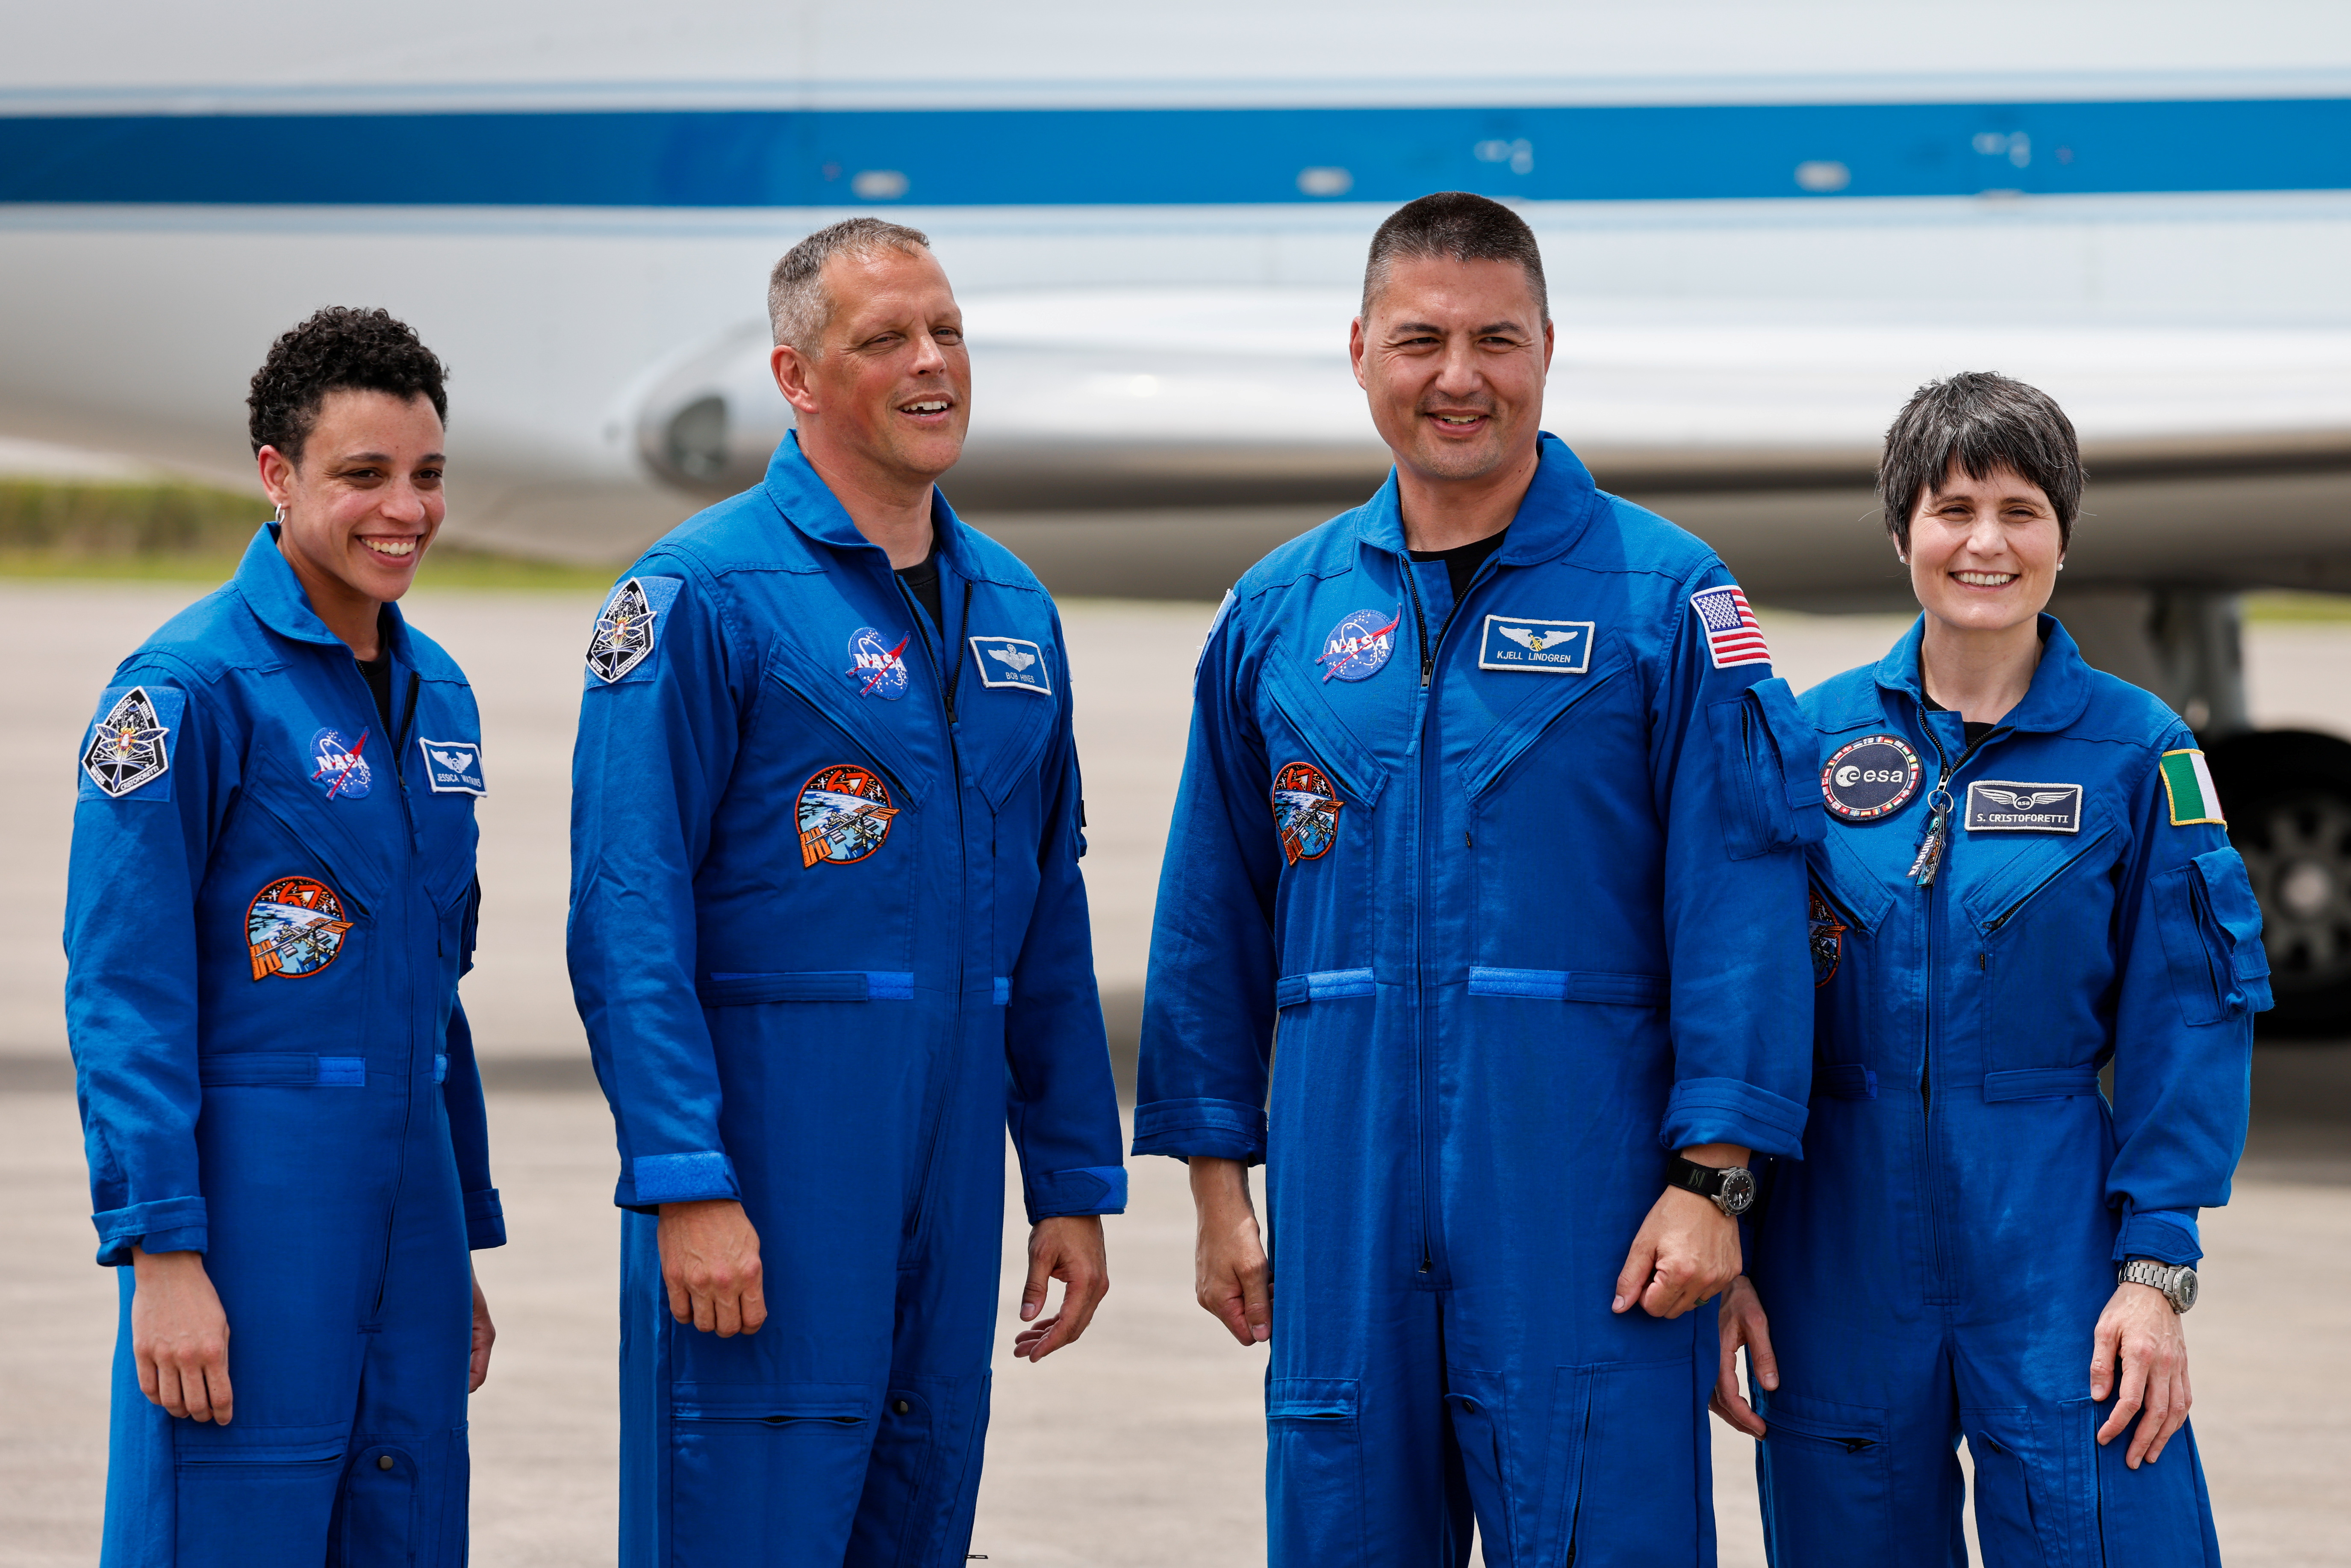 Astronauts arrive ahead of Crew Dragon spacecraft launch in Cape Canaveral